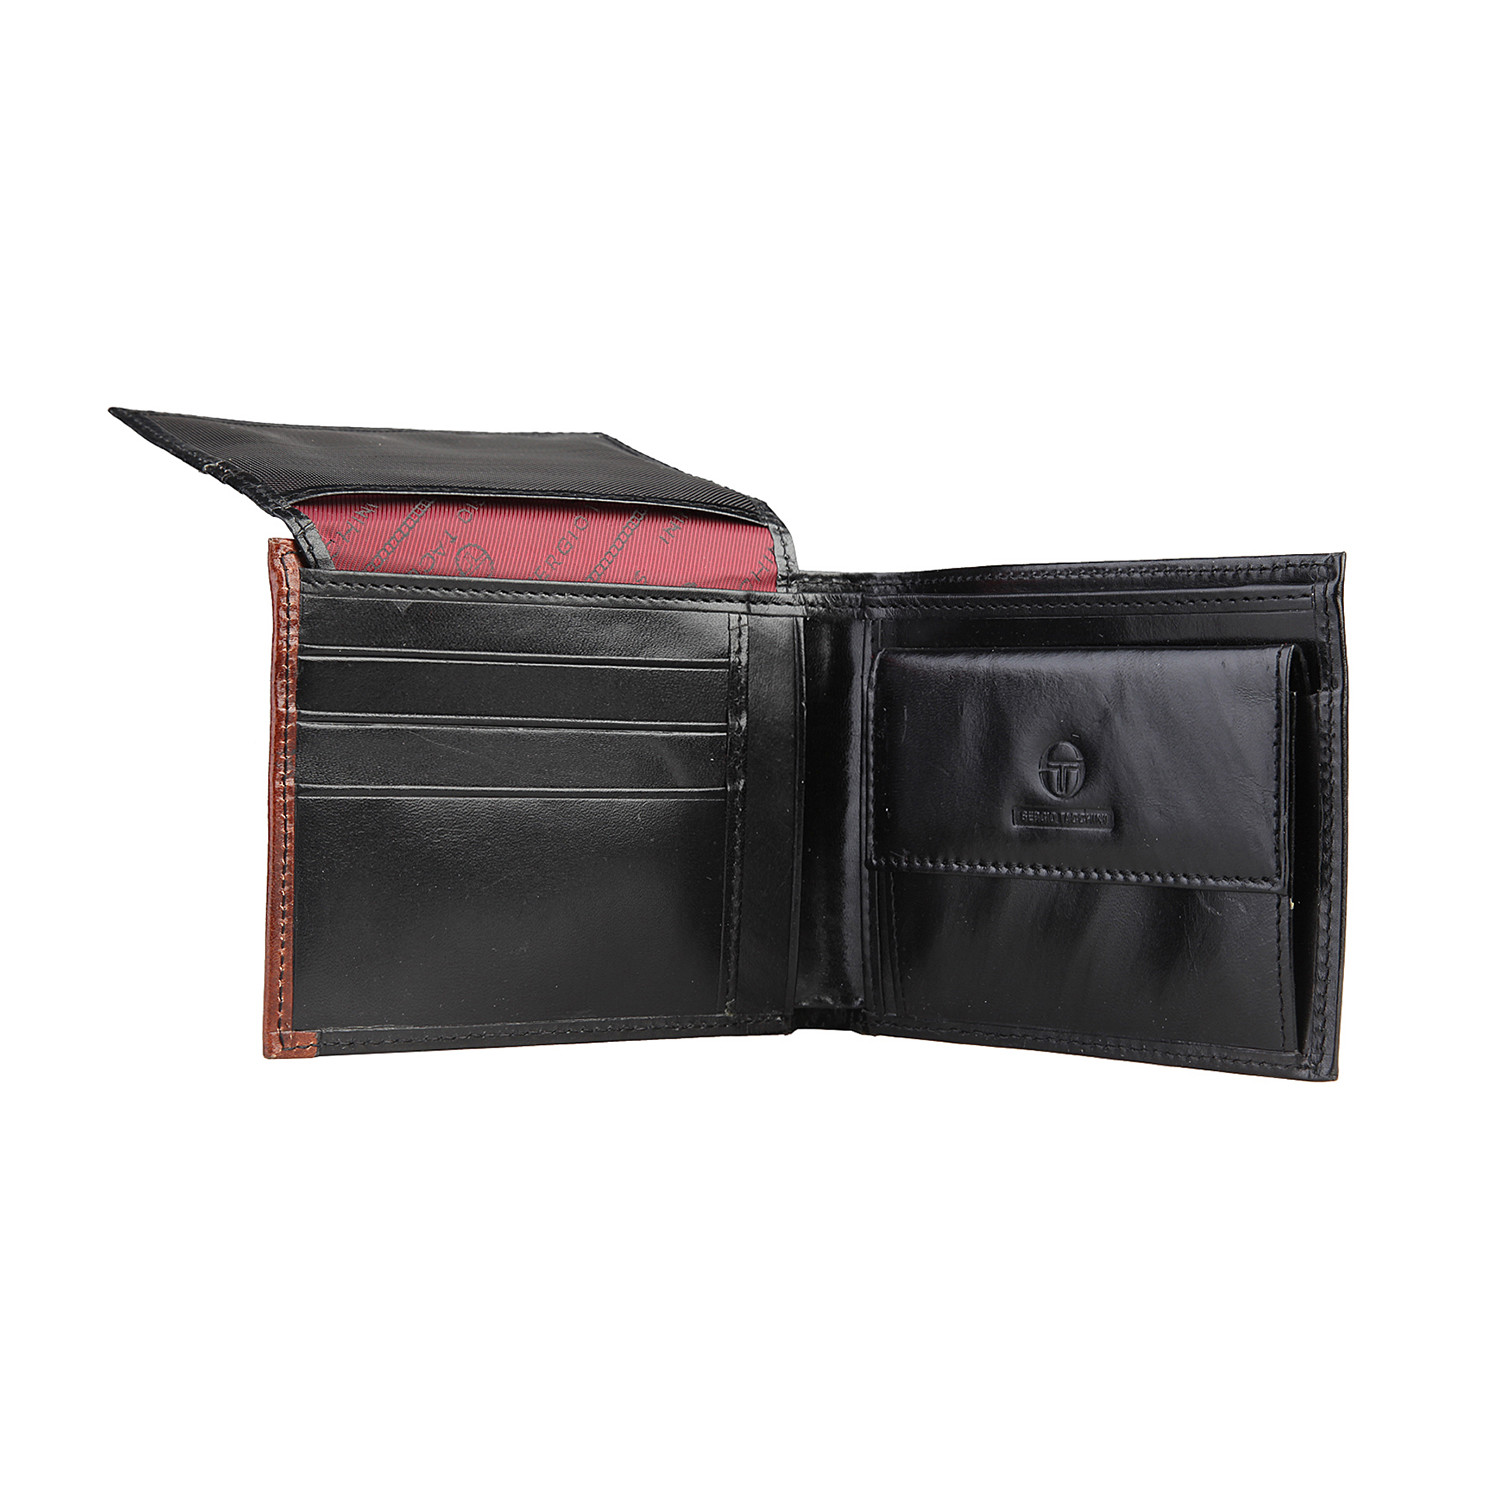 Stitched Leather Wallet // Black - Sergio Tacchini - Touch of Modern